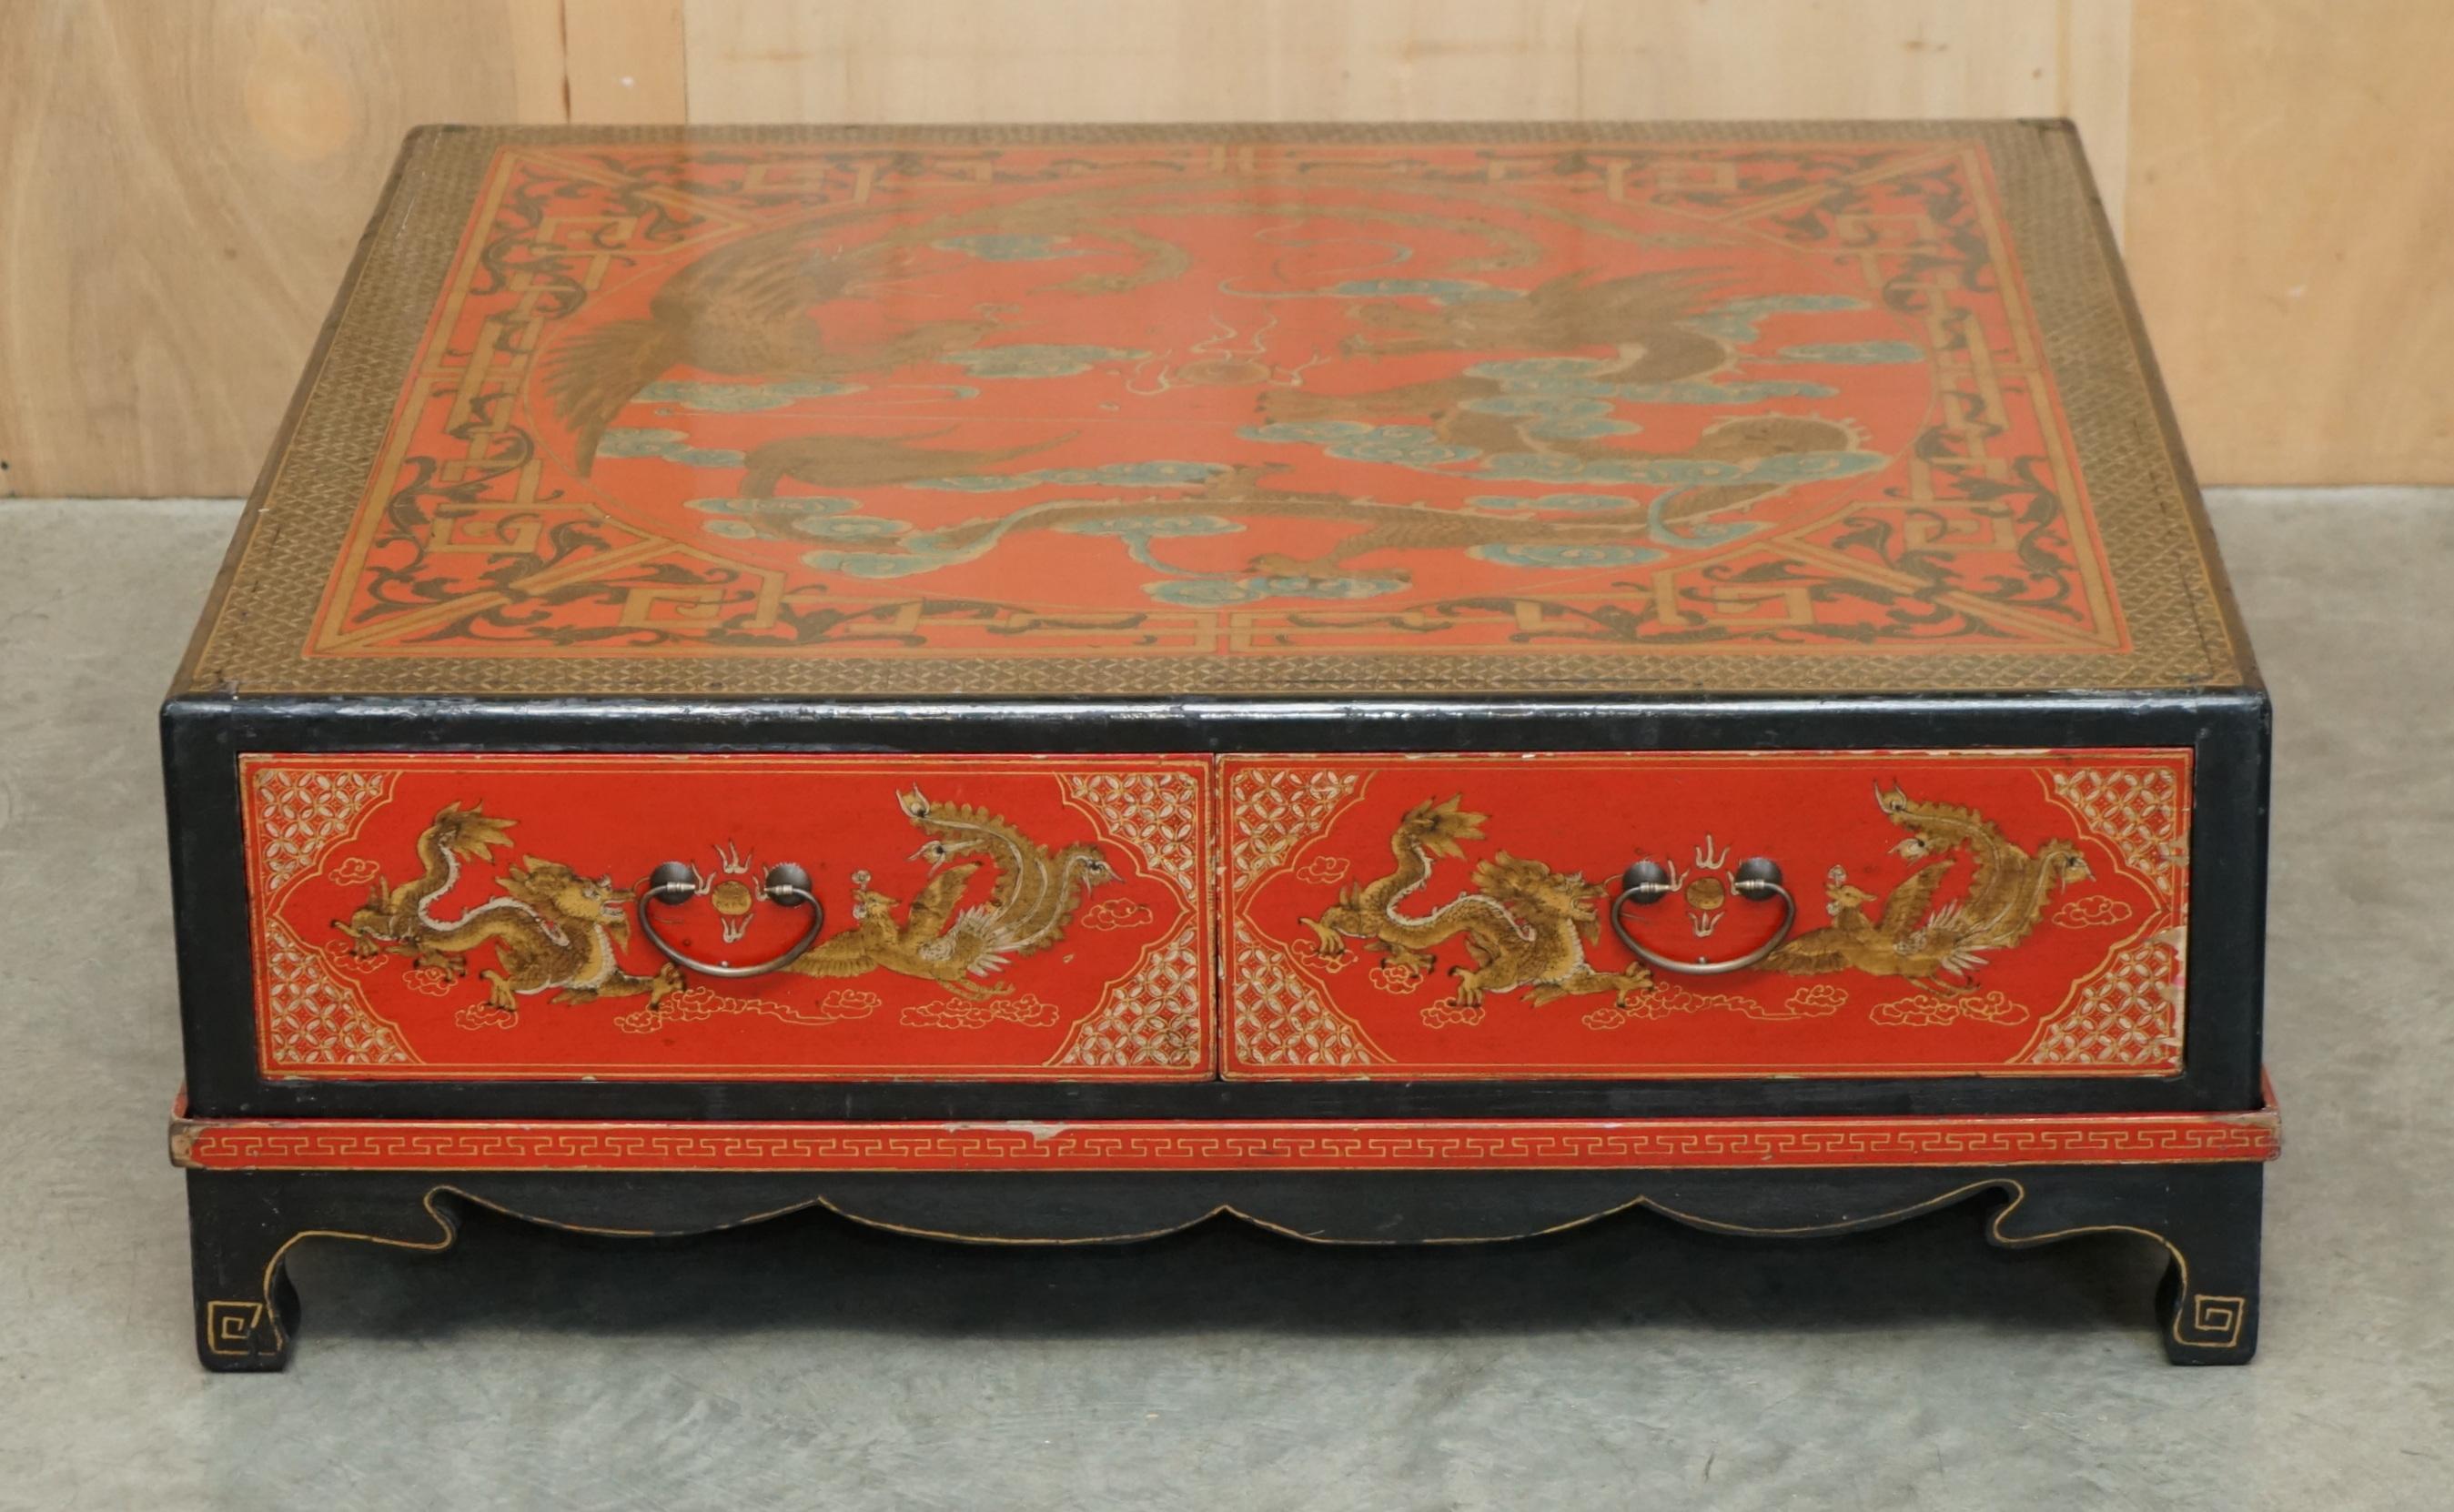 Royal House Antiques

Royal House Antiques is delighted to offer for sale this stunning original Chinese Export Chinoiserie Dragon extra large coffee table for four full sized drawers

Please note the delivery fee listed is just a guide, it covers